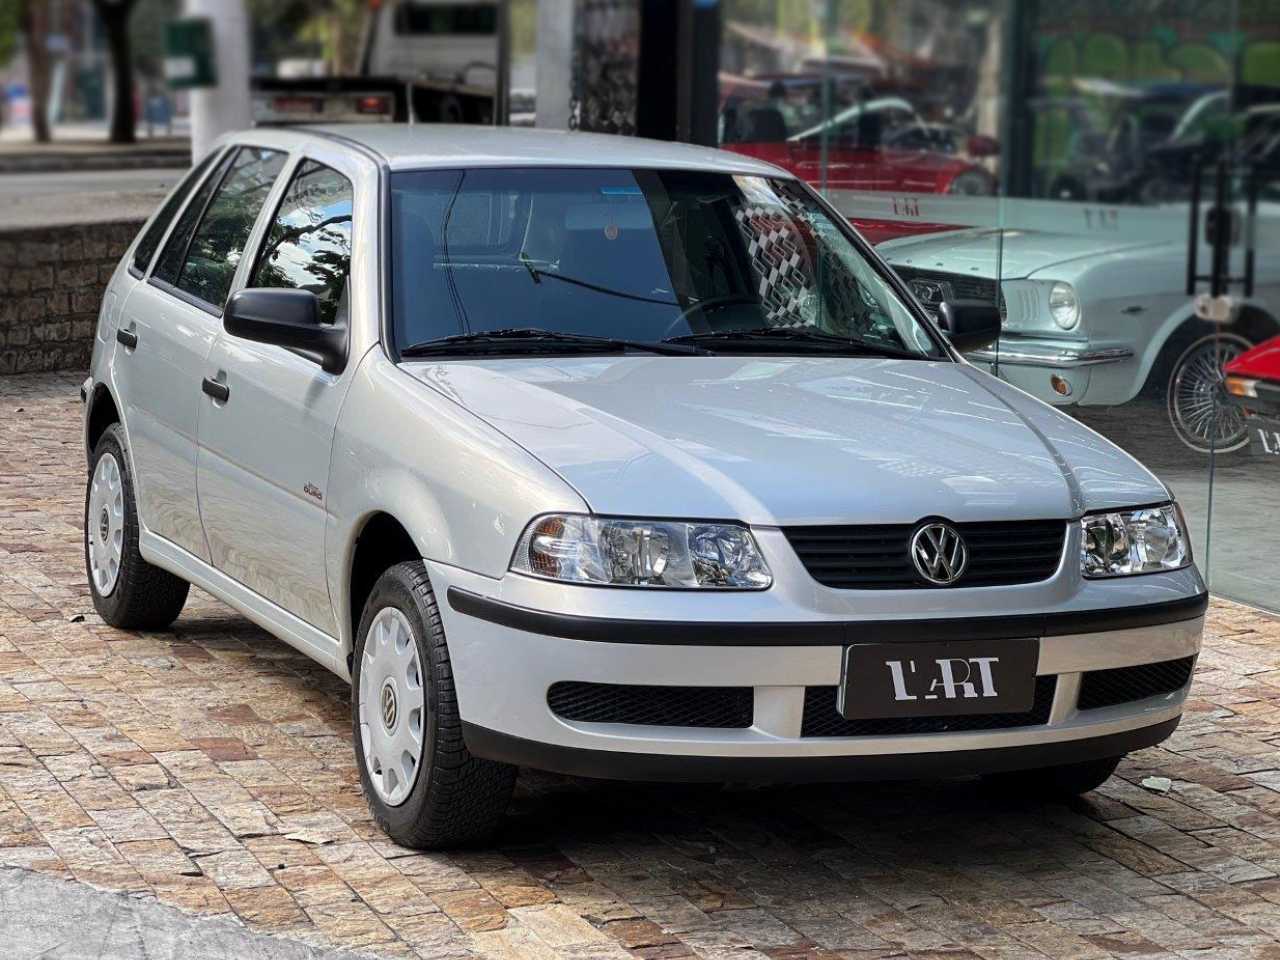 VW Gol Srie Ouro 2001